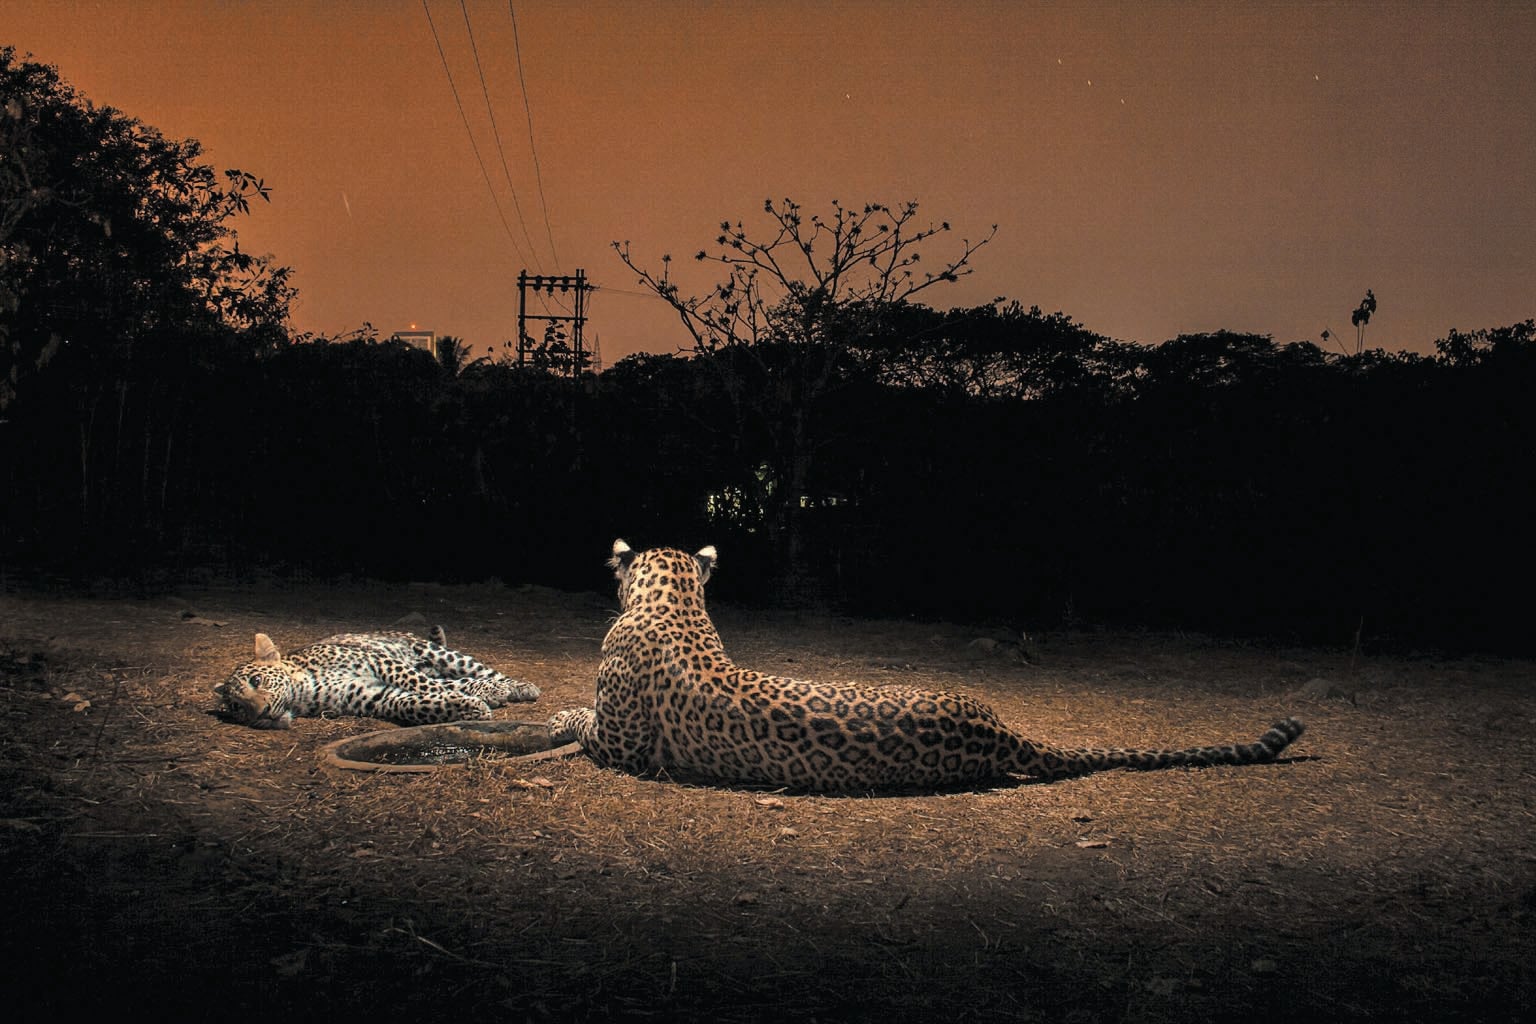 Two leopards are shown resting at night with their backs to the camera trap that took their picture.